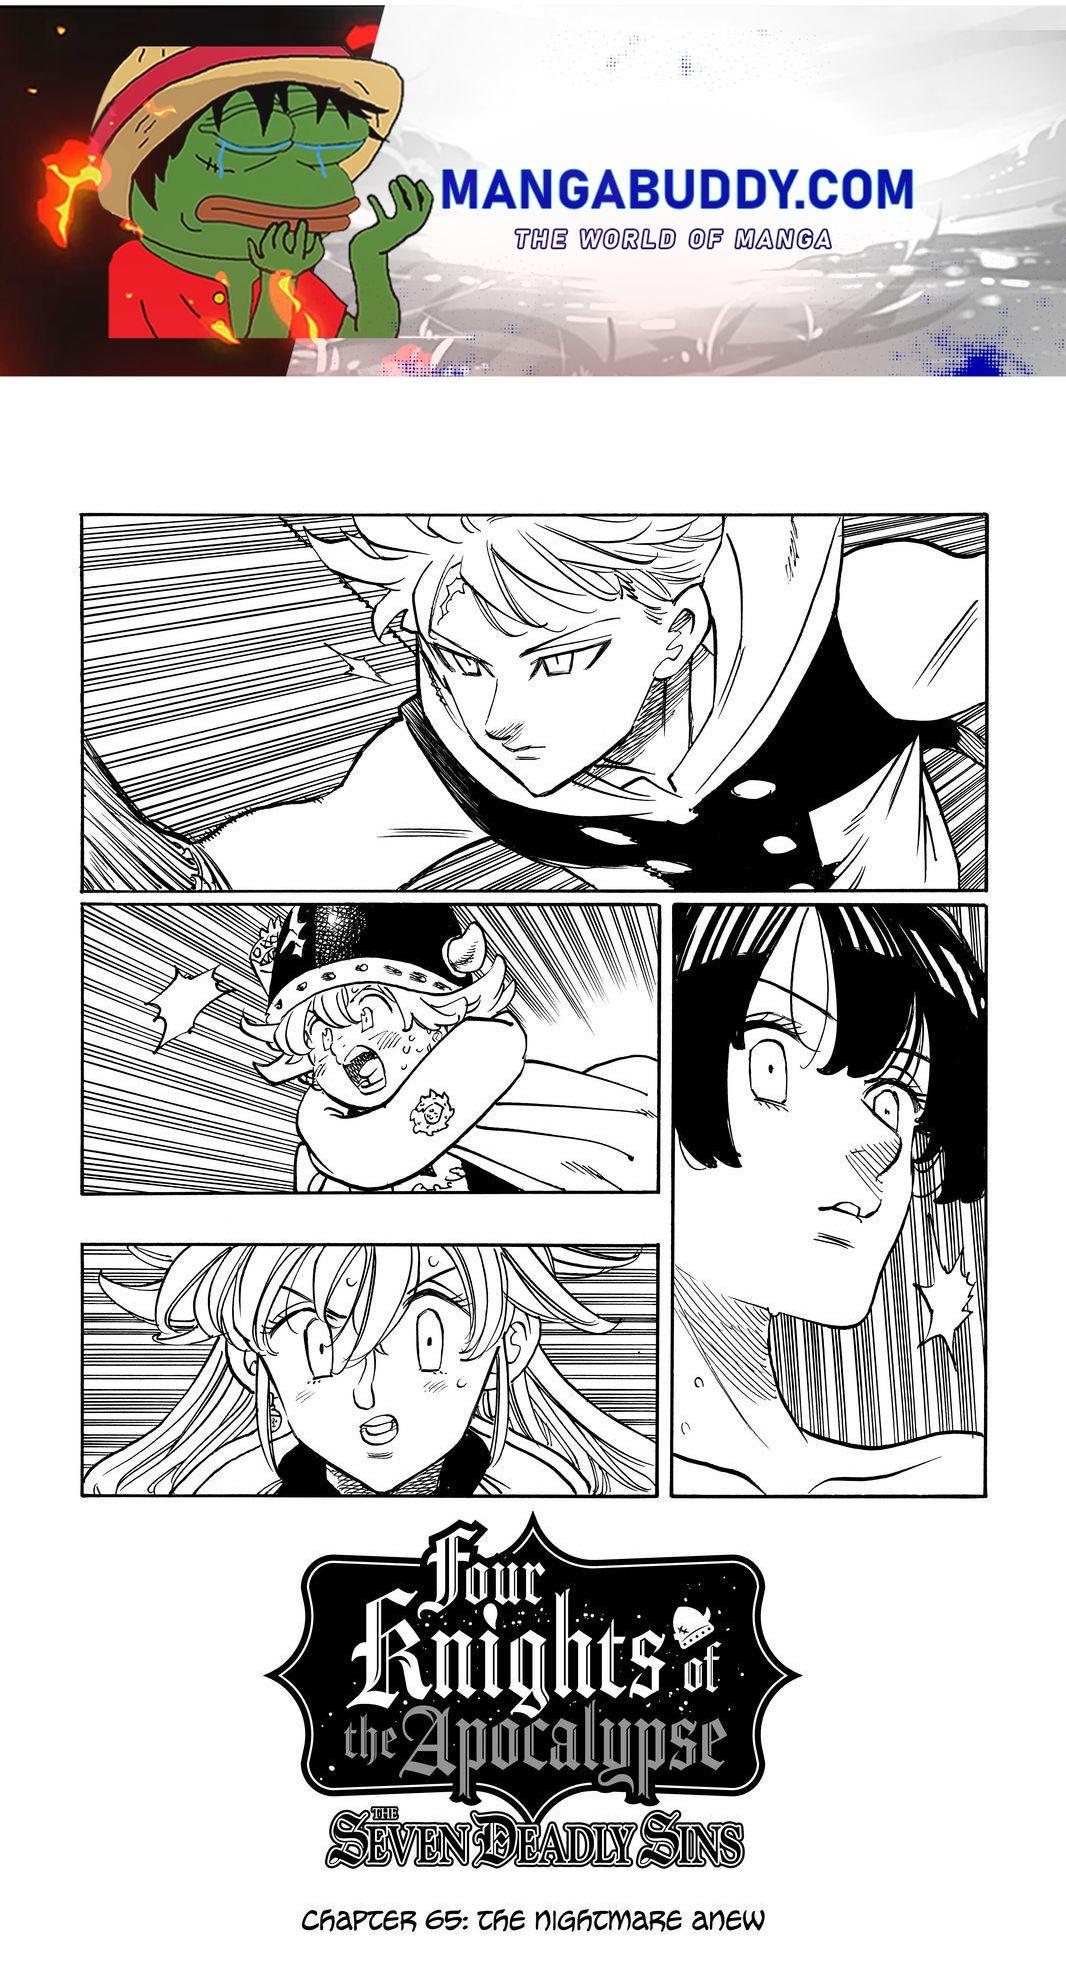 Four Knights of the apocalypse chapter 122, Chapter 1